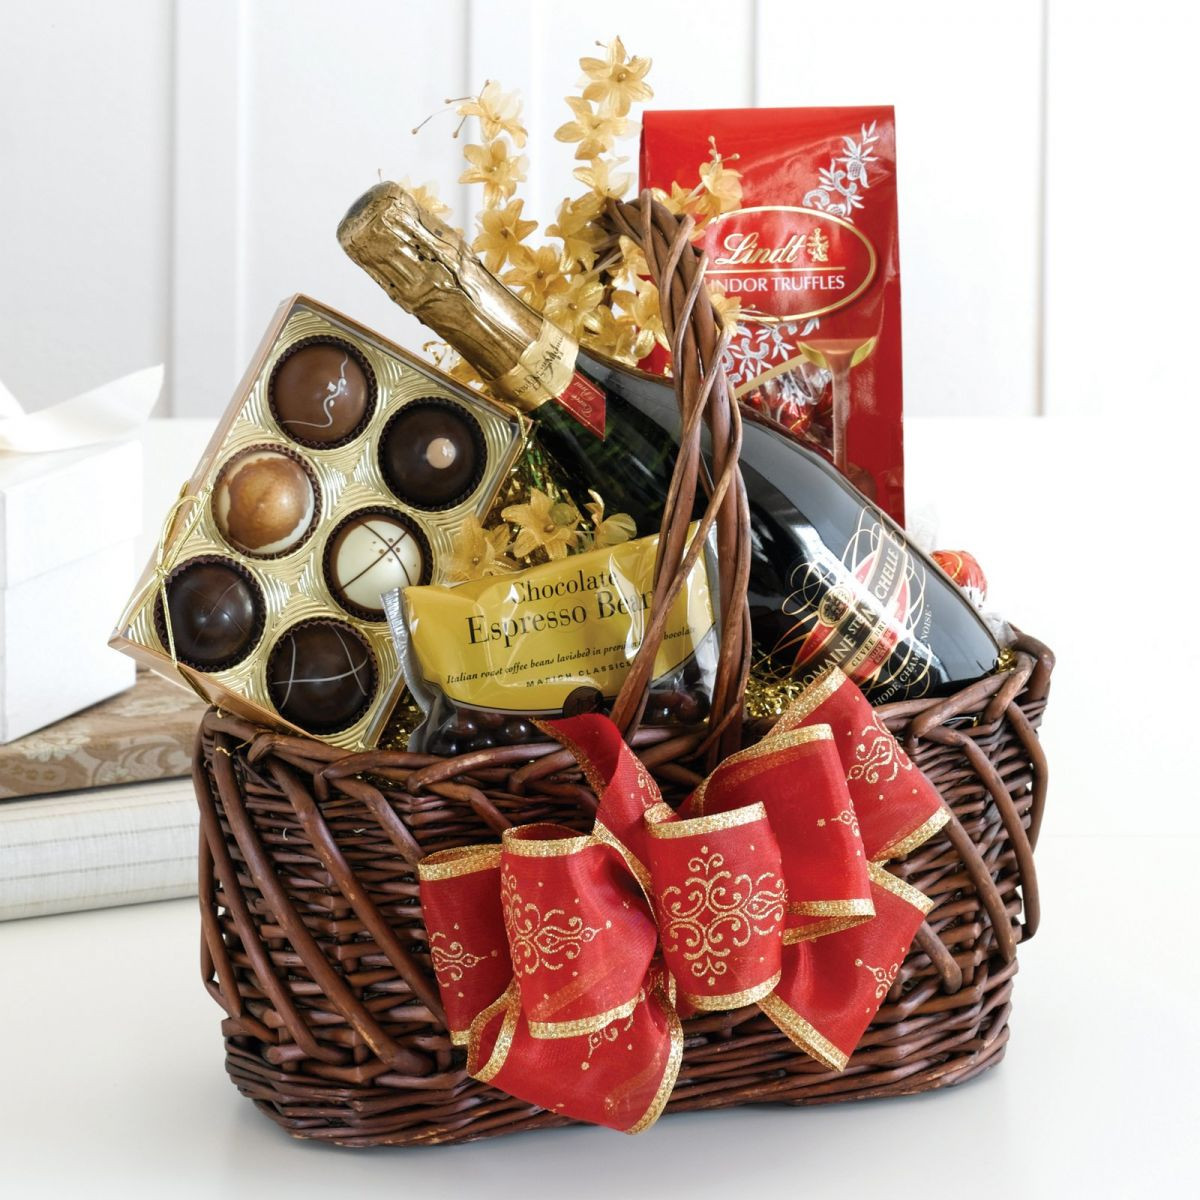 Holiday Gift Baskets Ideas
 Collectibles And Gifts Chocolate Gift Basket Ideas